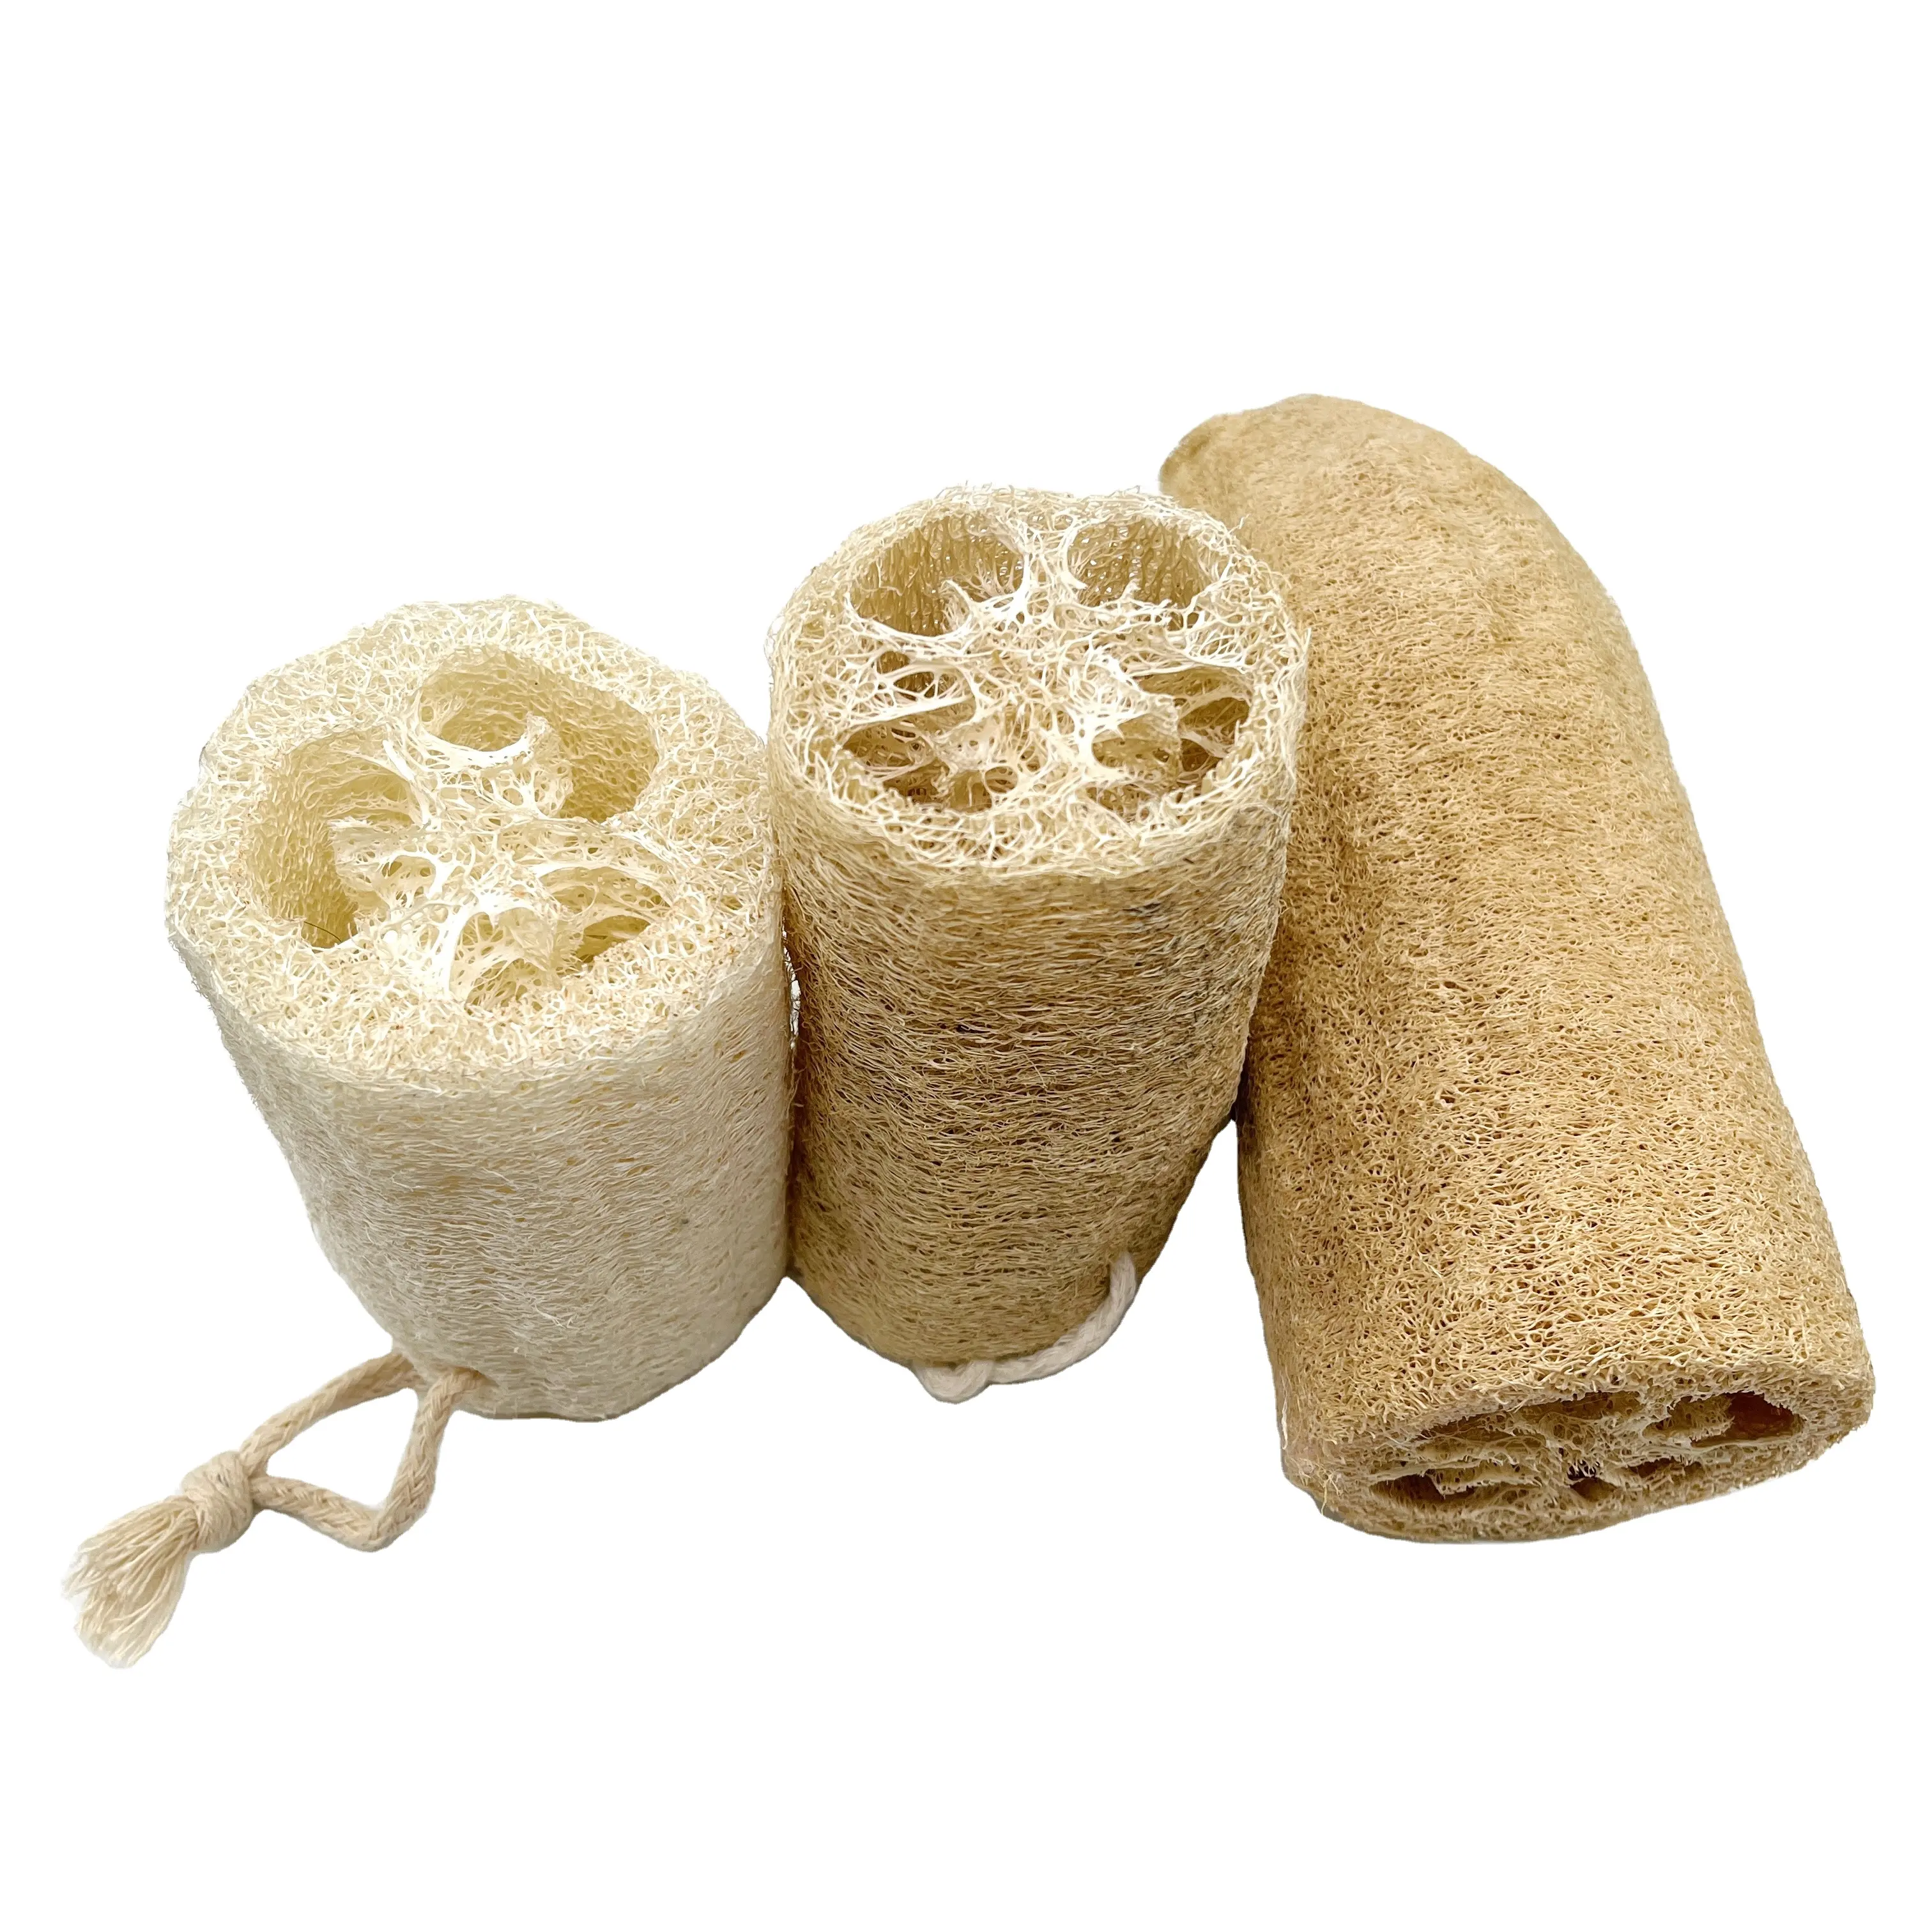 Eco-Friendly Natural Kitchen Washing Up Sponge Loofah Non-Odor Dish Sponges Sustainable Unbleached Loofah Plastic-Free